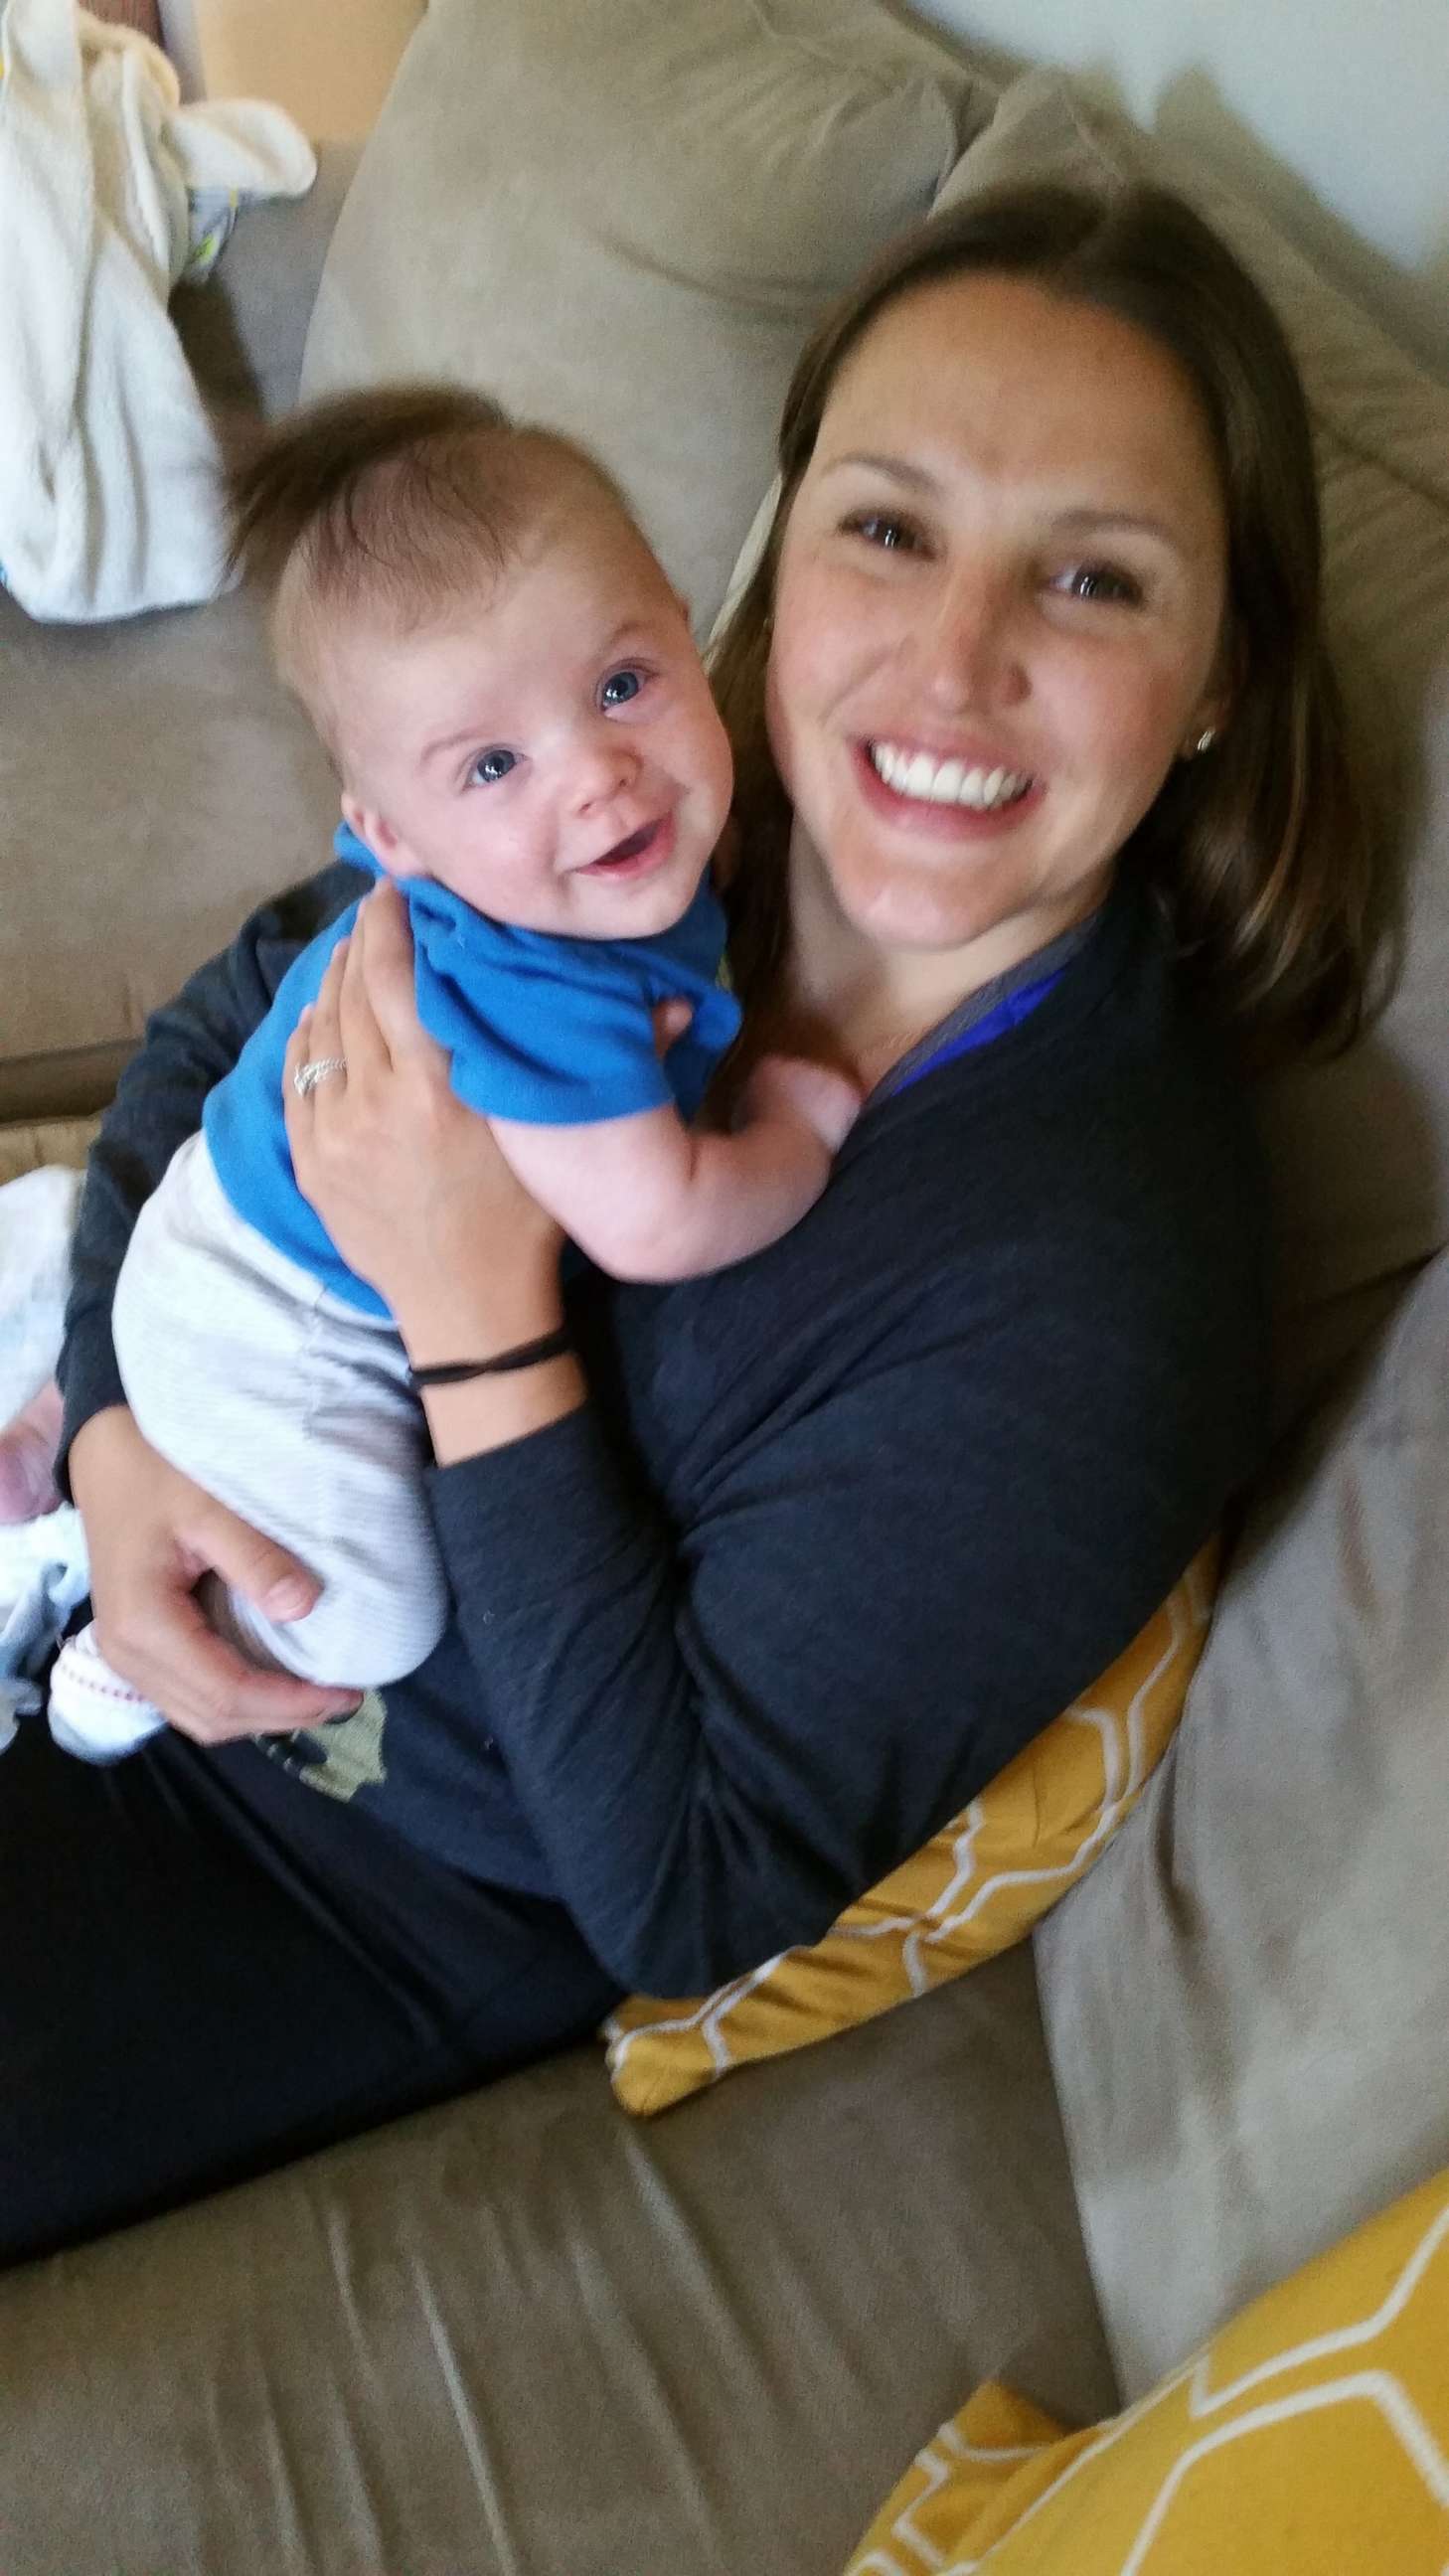 PHOTO: Kate Westervelt, 32, of Boston, poses with her son, Noah.